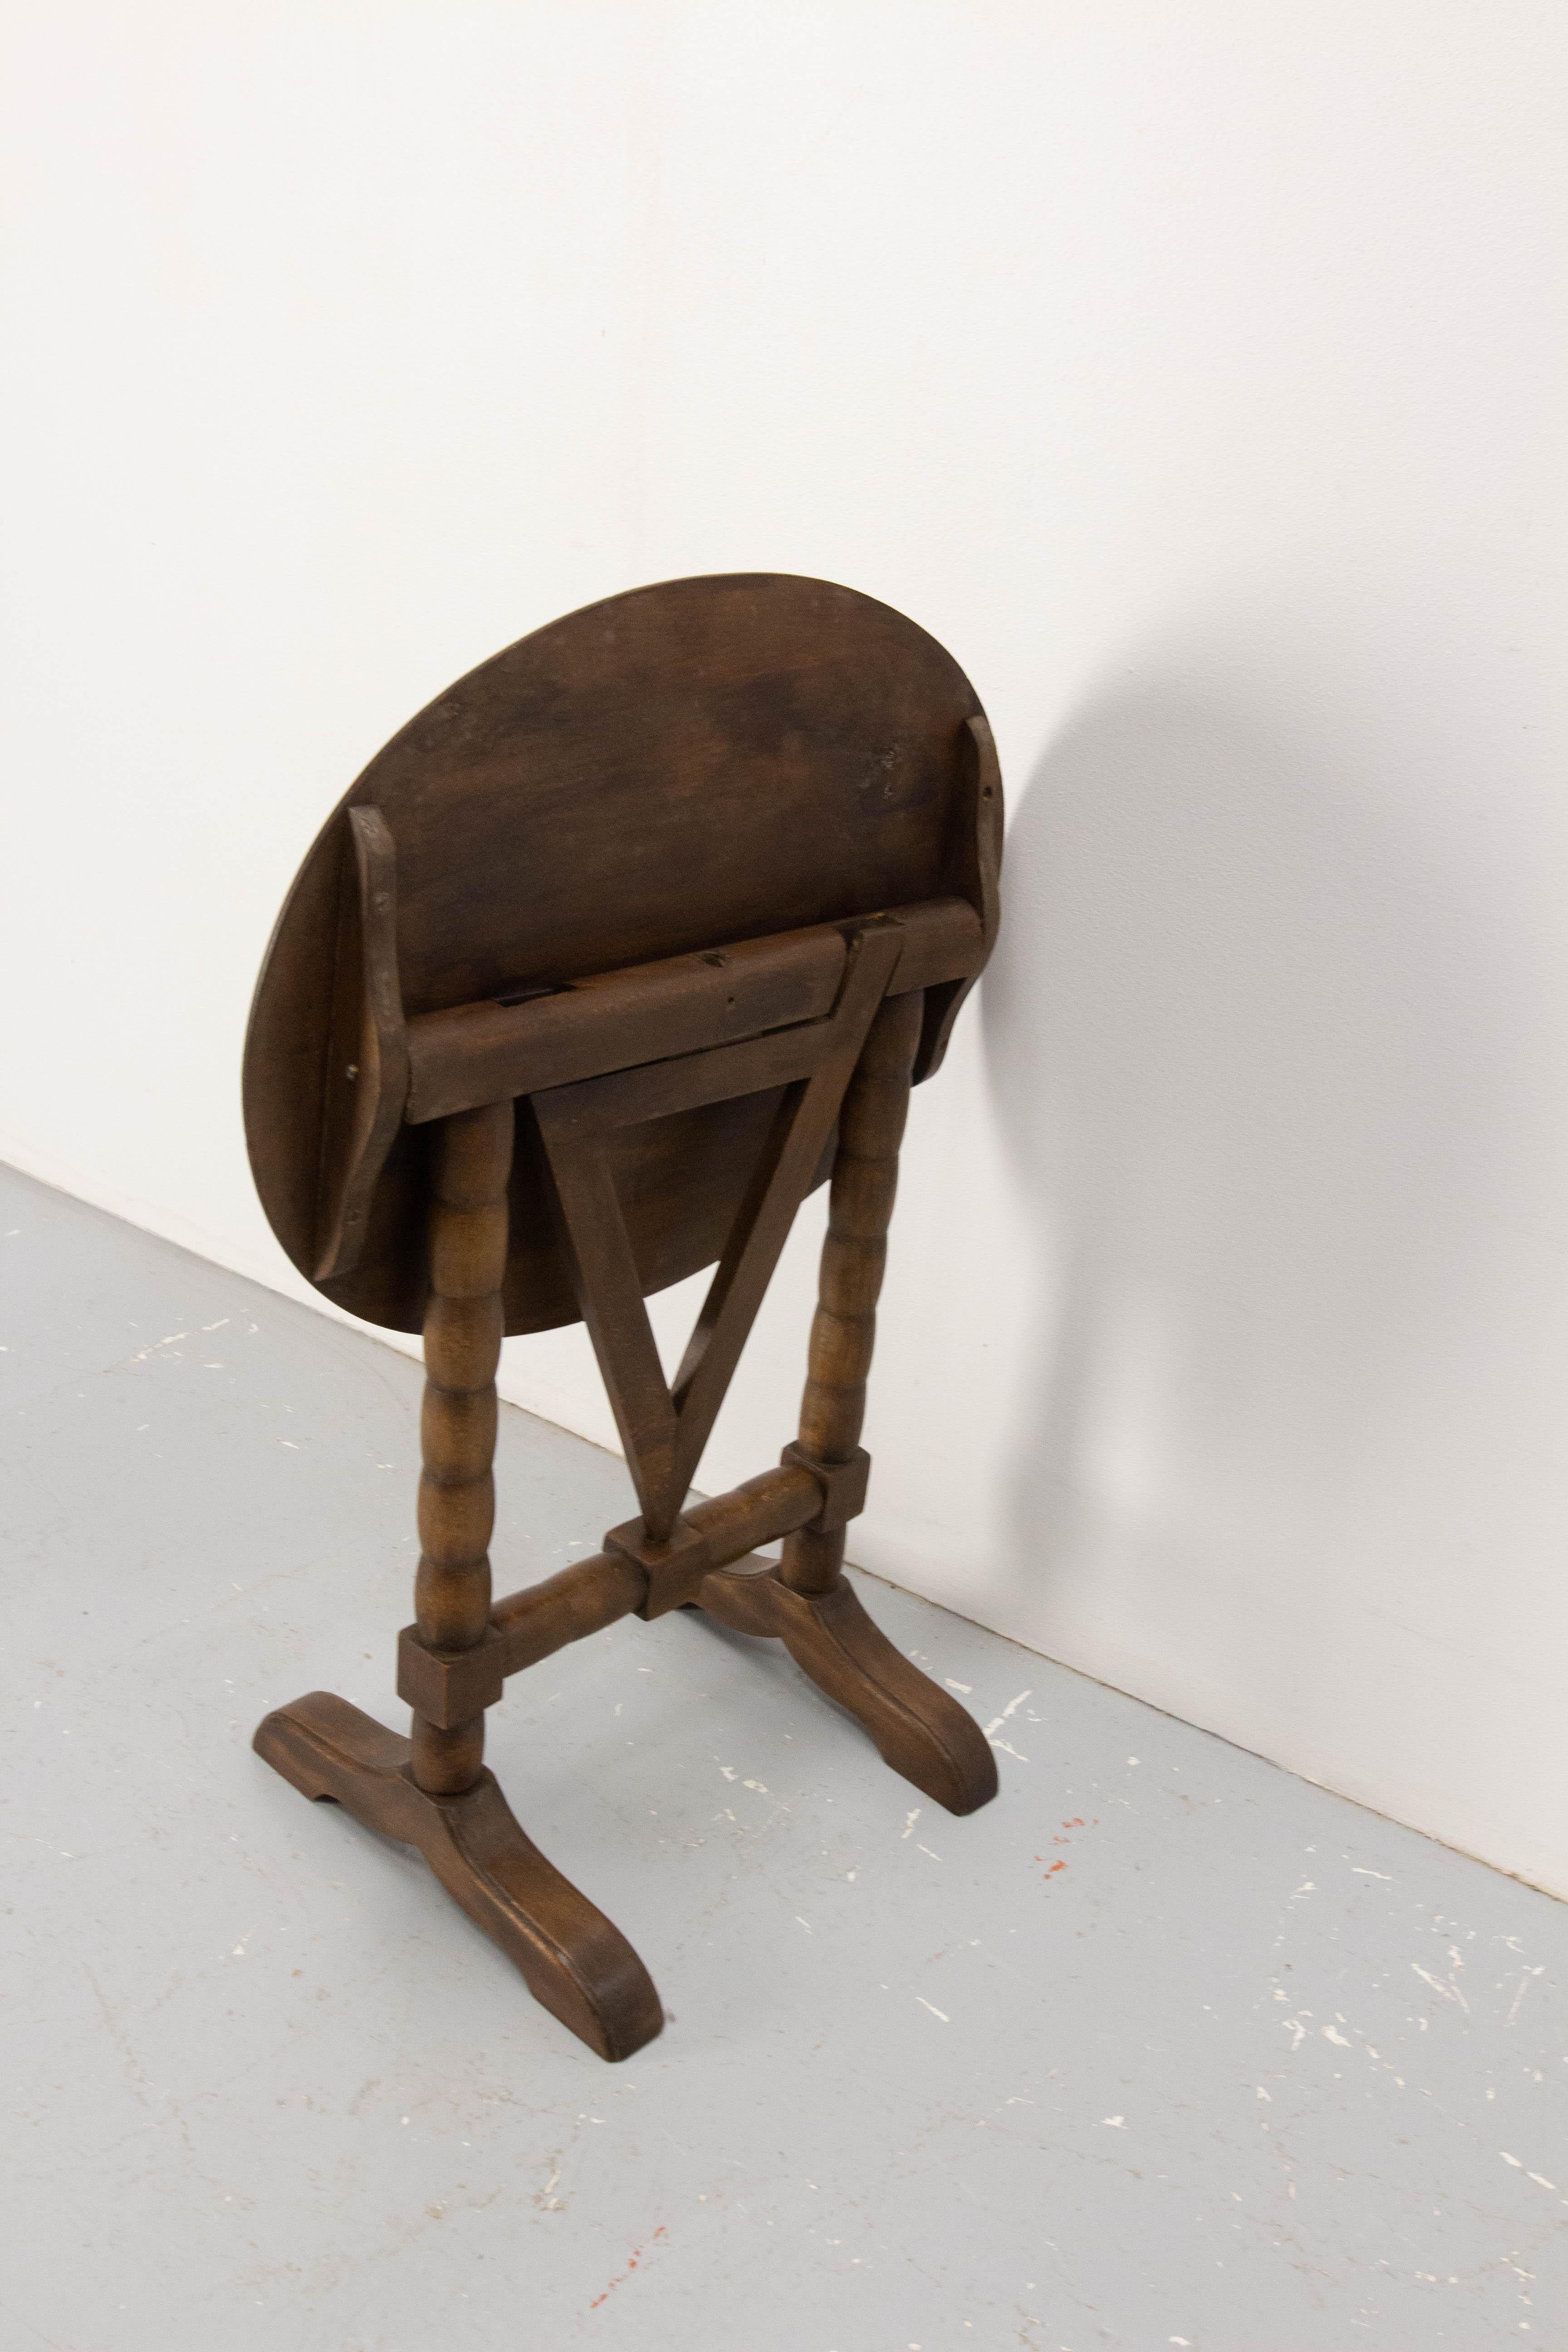 Mid-20th Century French Little Gueridon Foldable Side Table Called Winemaker's Table 19th Century